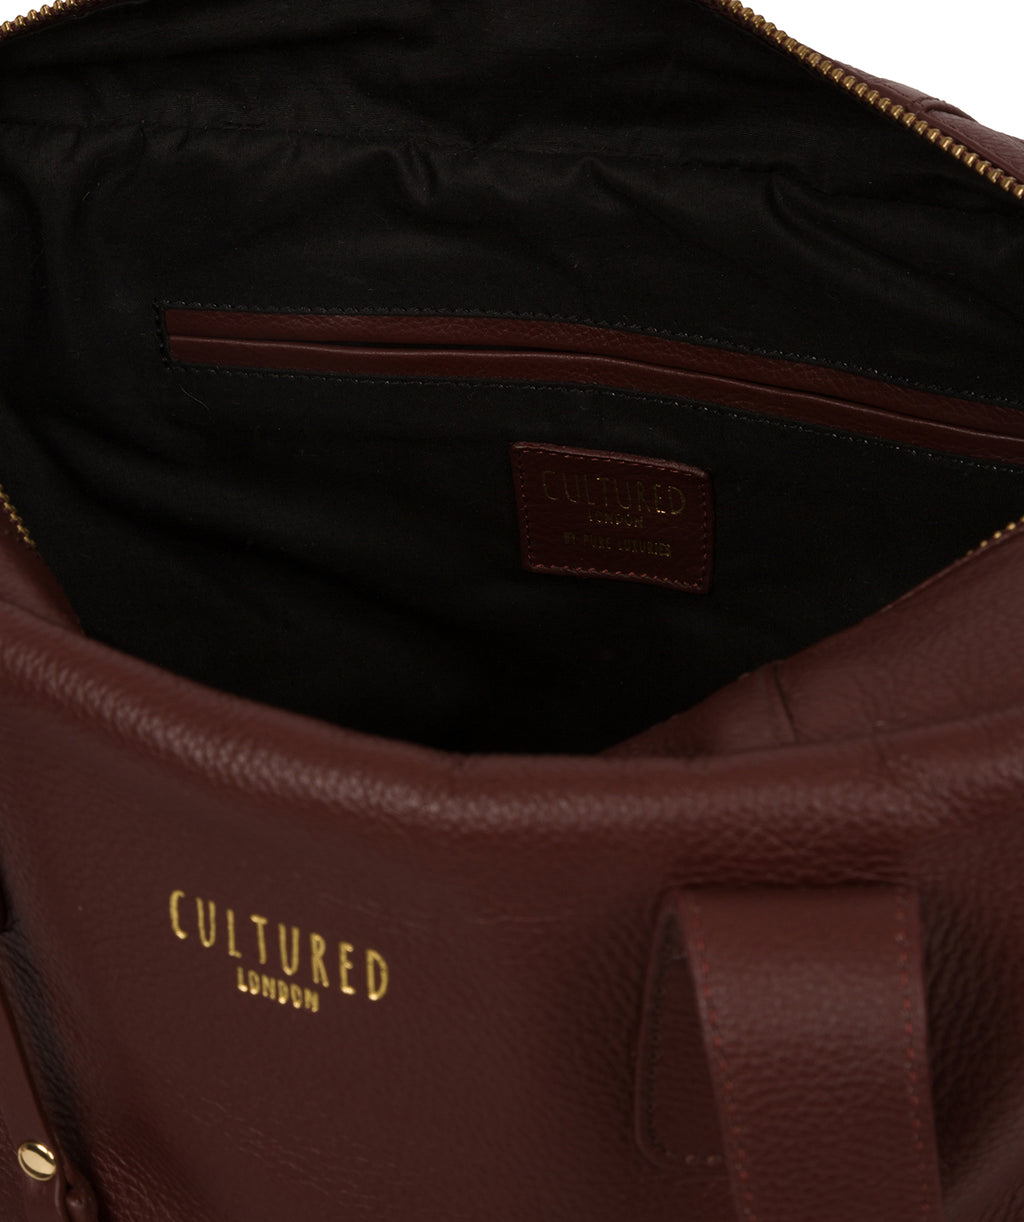 Chestnut Leather Handbag 'Hammersmith' by Cultured London – Pure ...